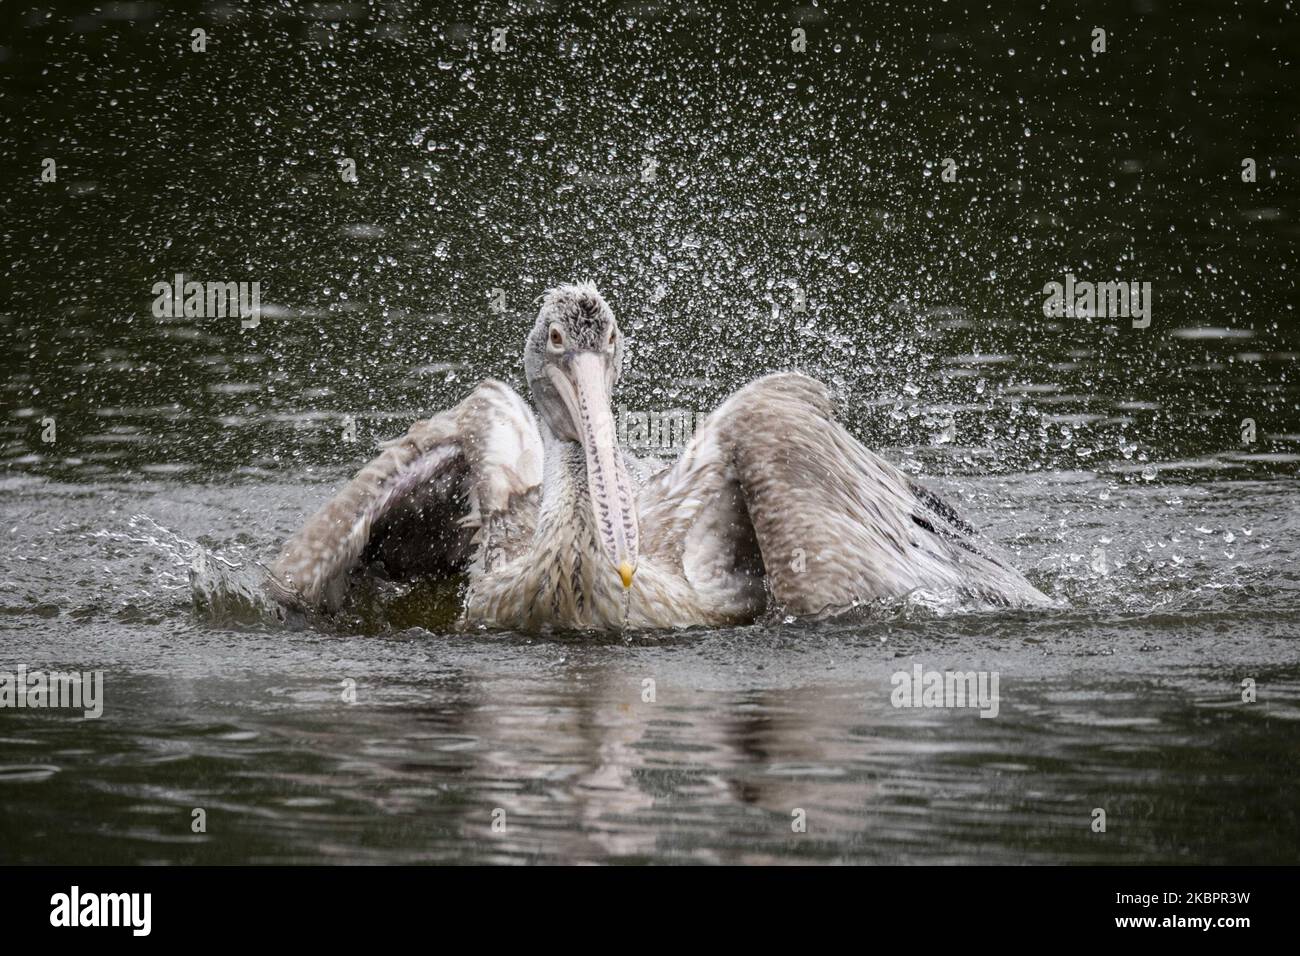 A spot-billed pelican is playing in the lake at Hlawga National Park on the United Nations' World Environment Day, on the outskirts of Yangon on June 5, 2020. World Environment Day, which encourages worldwide awareness and action for the protection of the environment. The theme for this year is “Biodiversity”. Hlawga National Park was created as an environmental education center in 1982. It is home to 25 species of mammals, 9 species of reptiles, 54 species of amphibians, 192 species of birds, 103 species of butterfly and 23 species of fish. (Photo by Shwe Paw Mya Tin/NurPhoto) Stock Photo